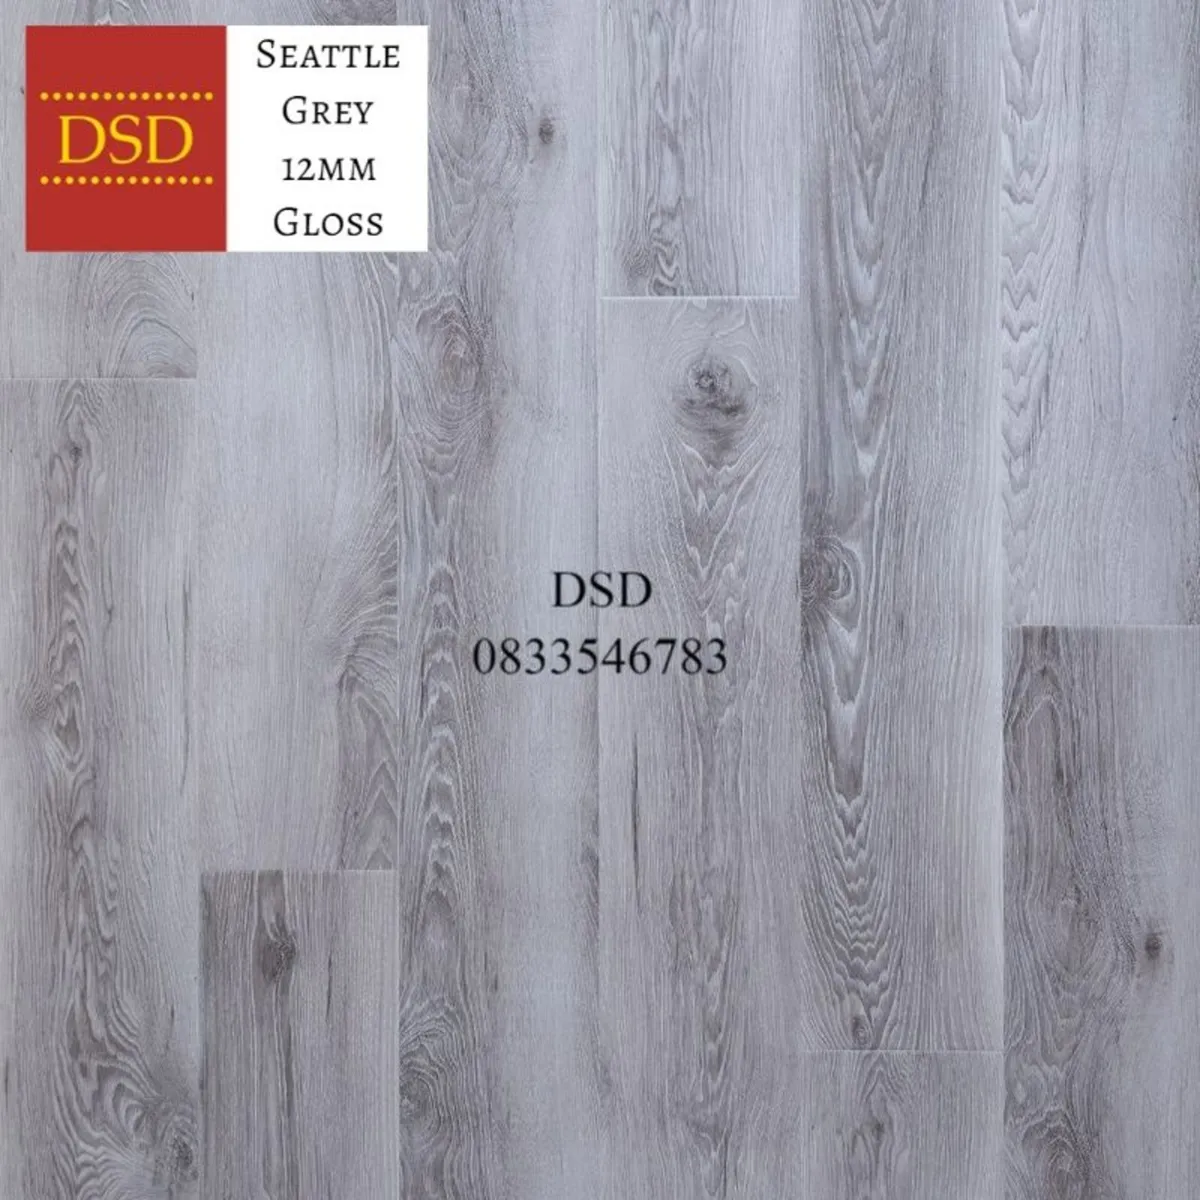 Seattle Grey Flooring - Free Nationwide Delivery - Image 1